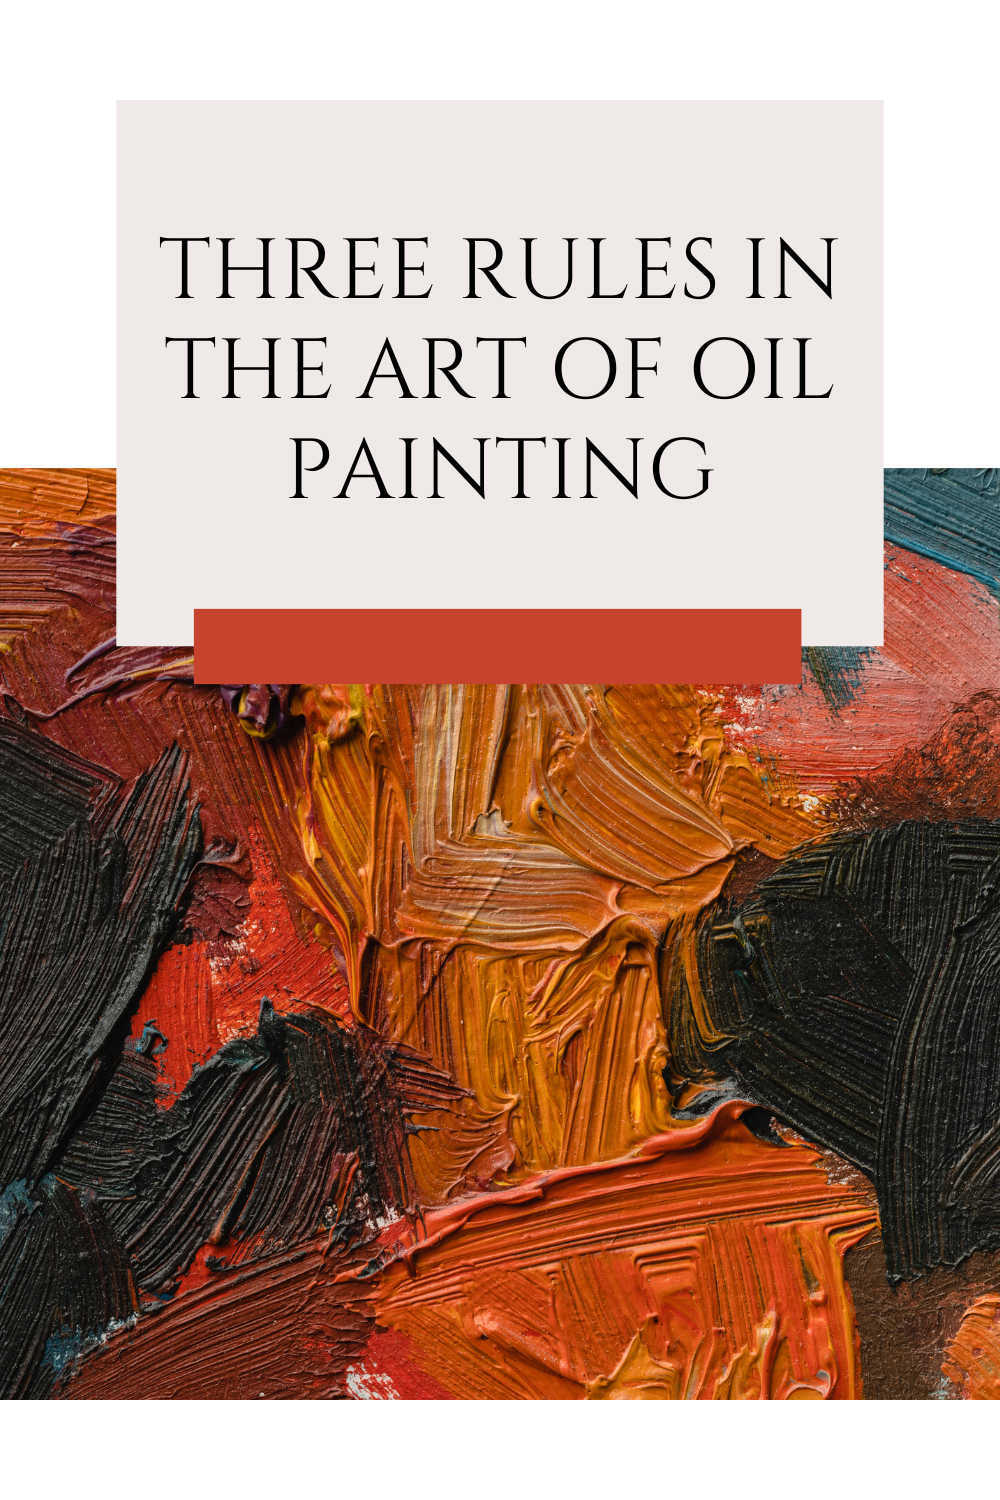 You are currently viewing Three rules in the art of oil painting